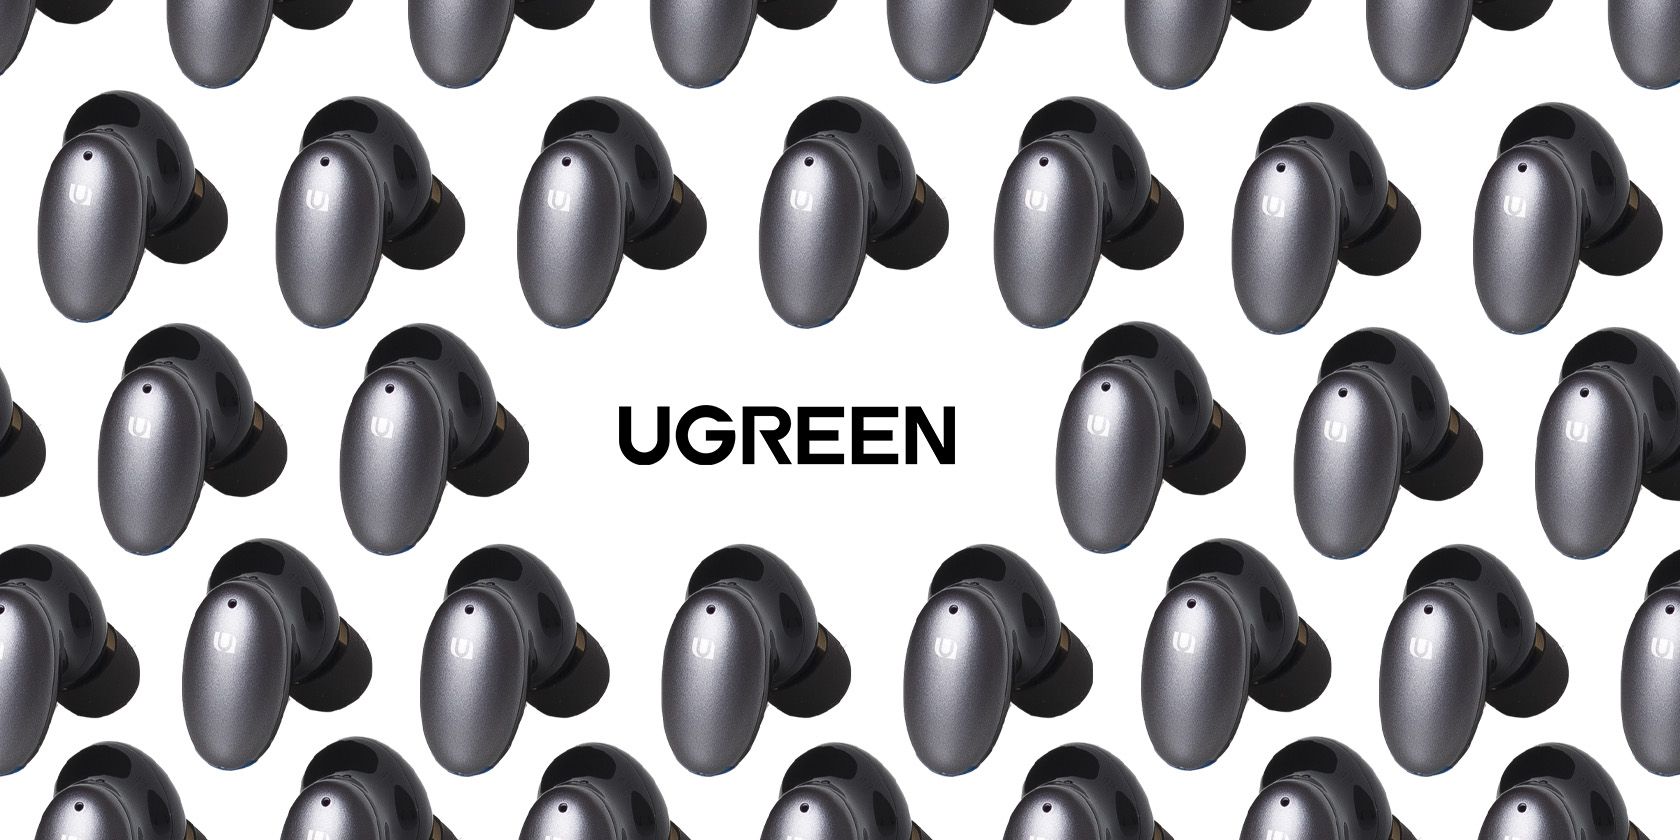 The UGREEN HiTune X6 wireless earbuds are loud, proud, and happy to be of service.